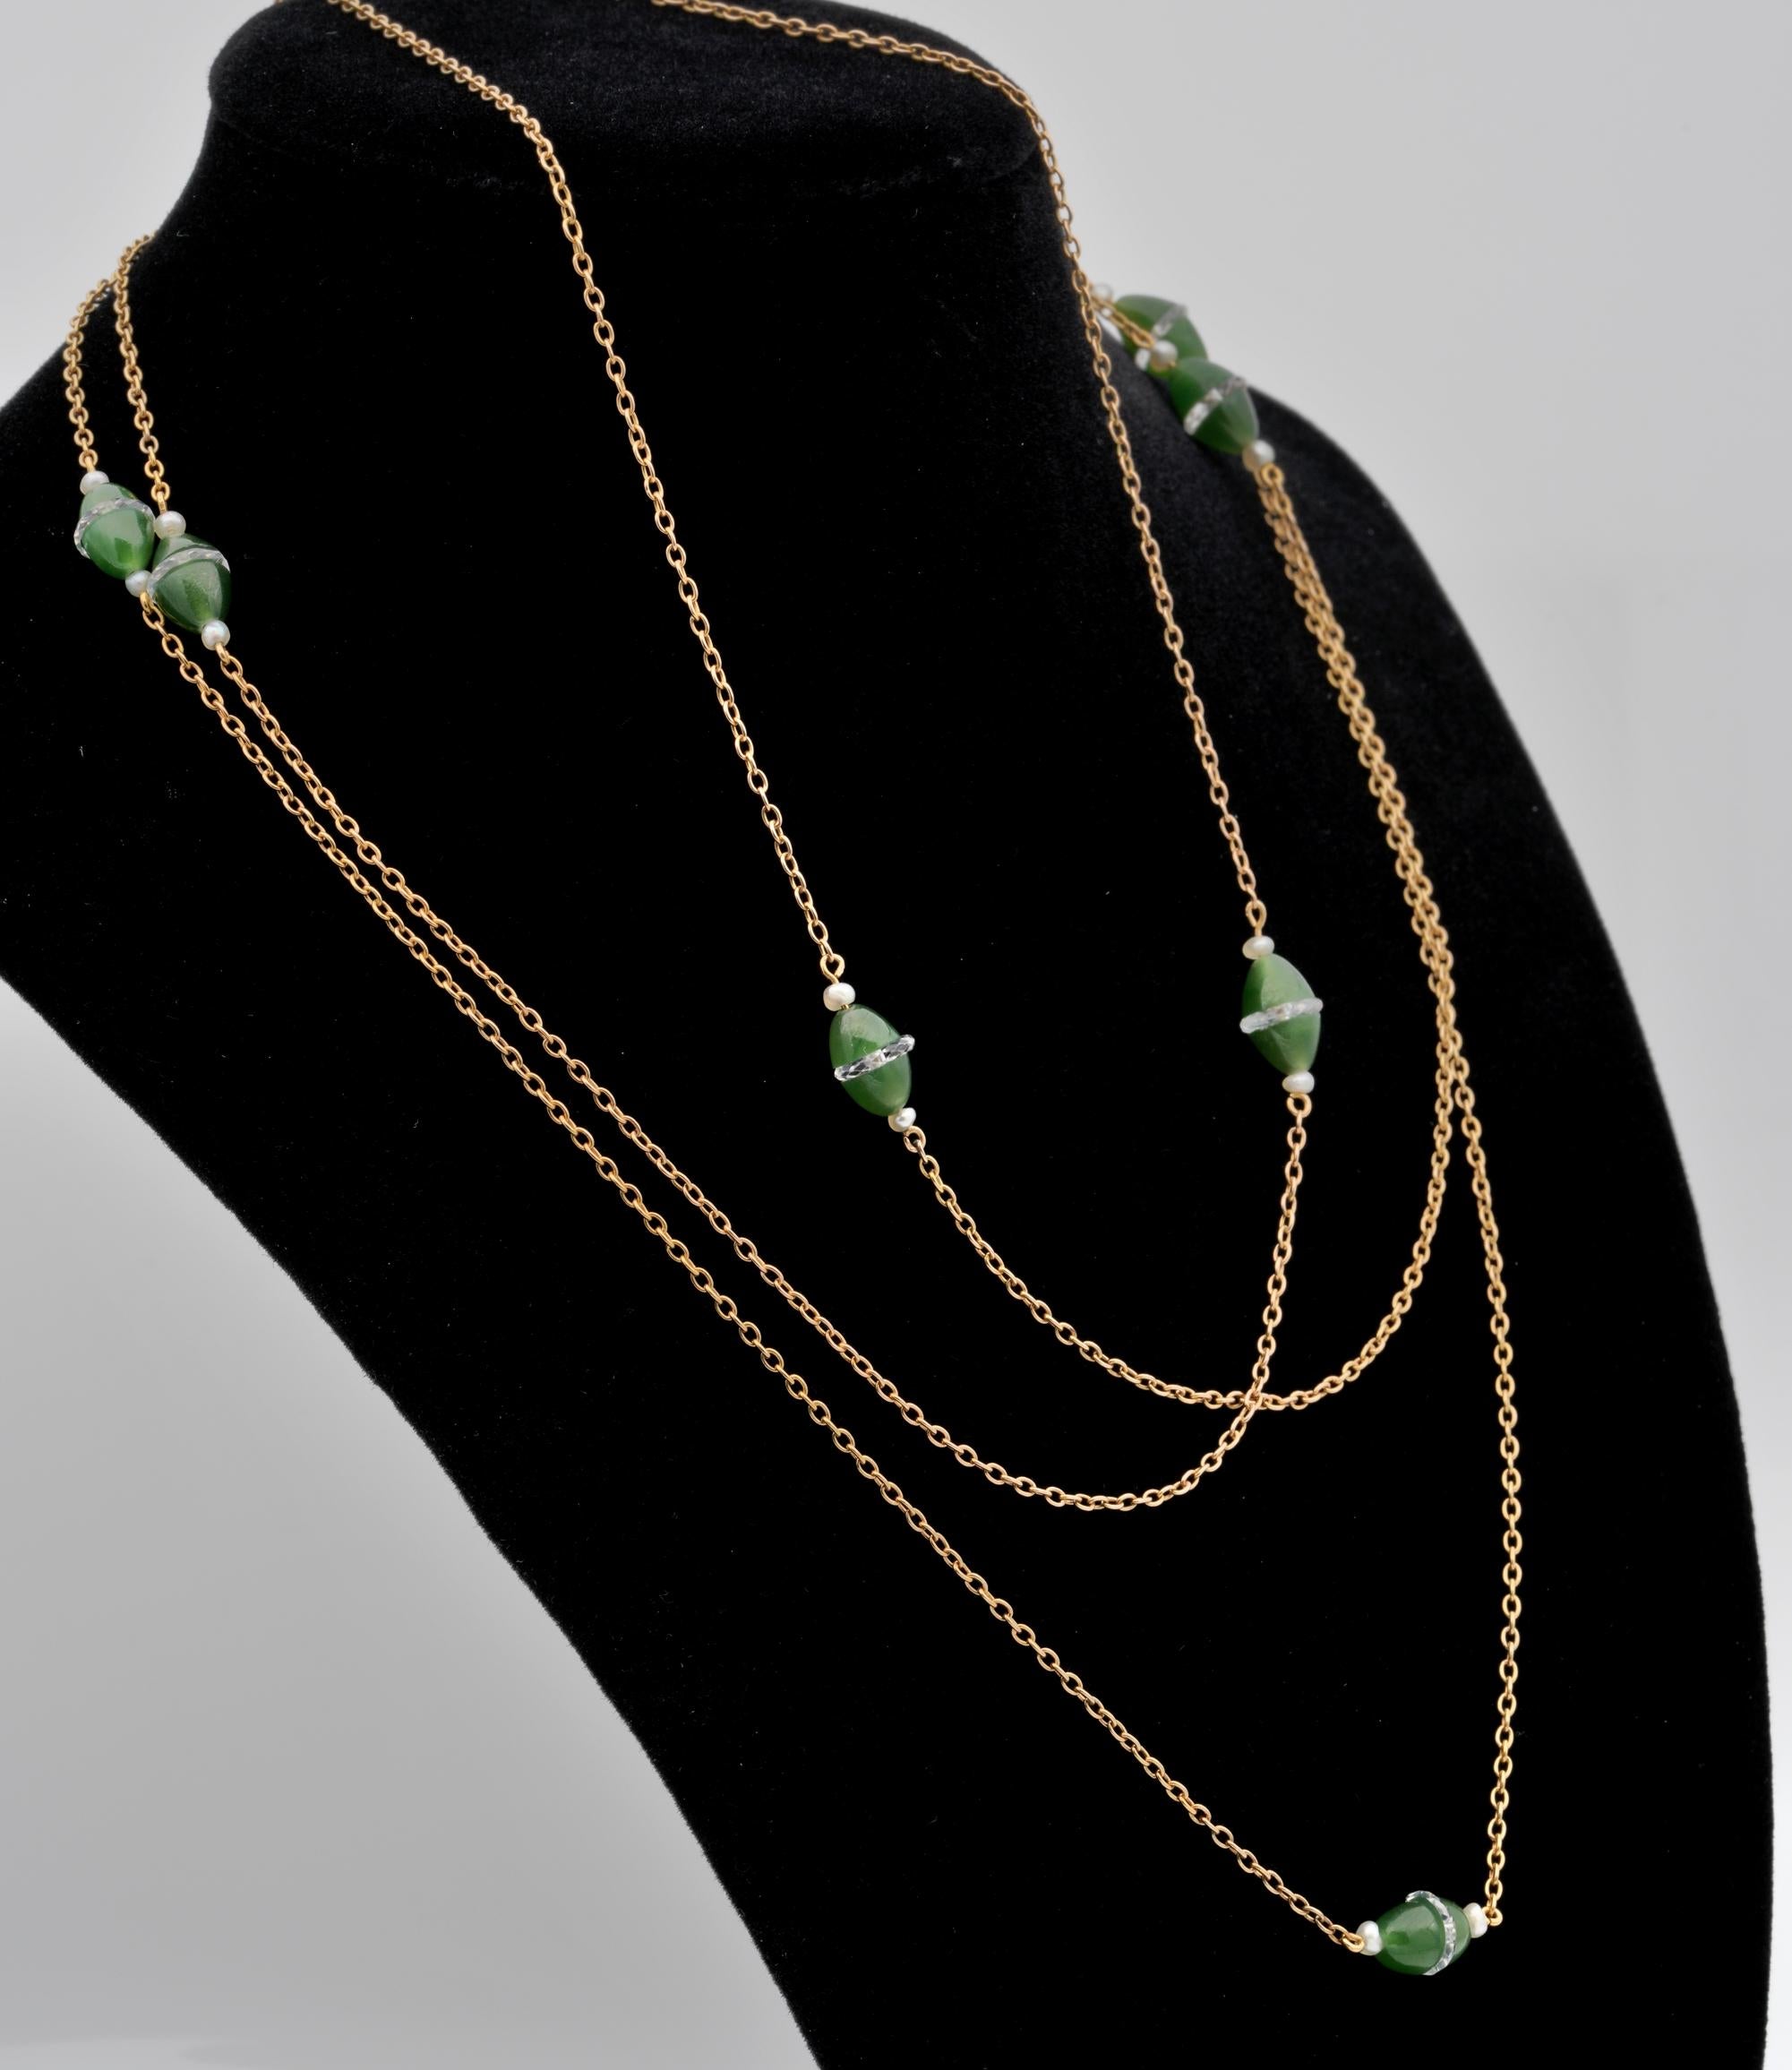 Women's Nephrite Jade Rock Crystal Pearl 18 KT Rare Long Suitor Chain For Sale